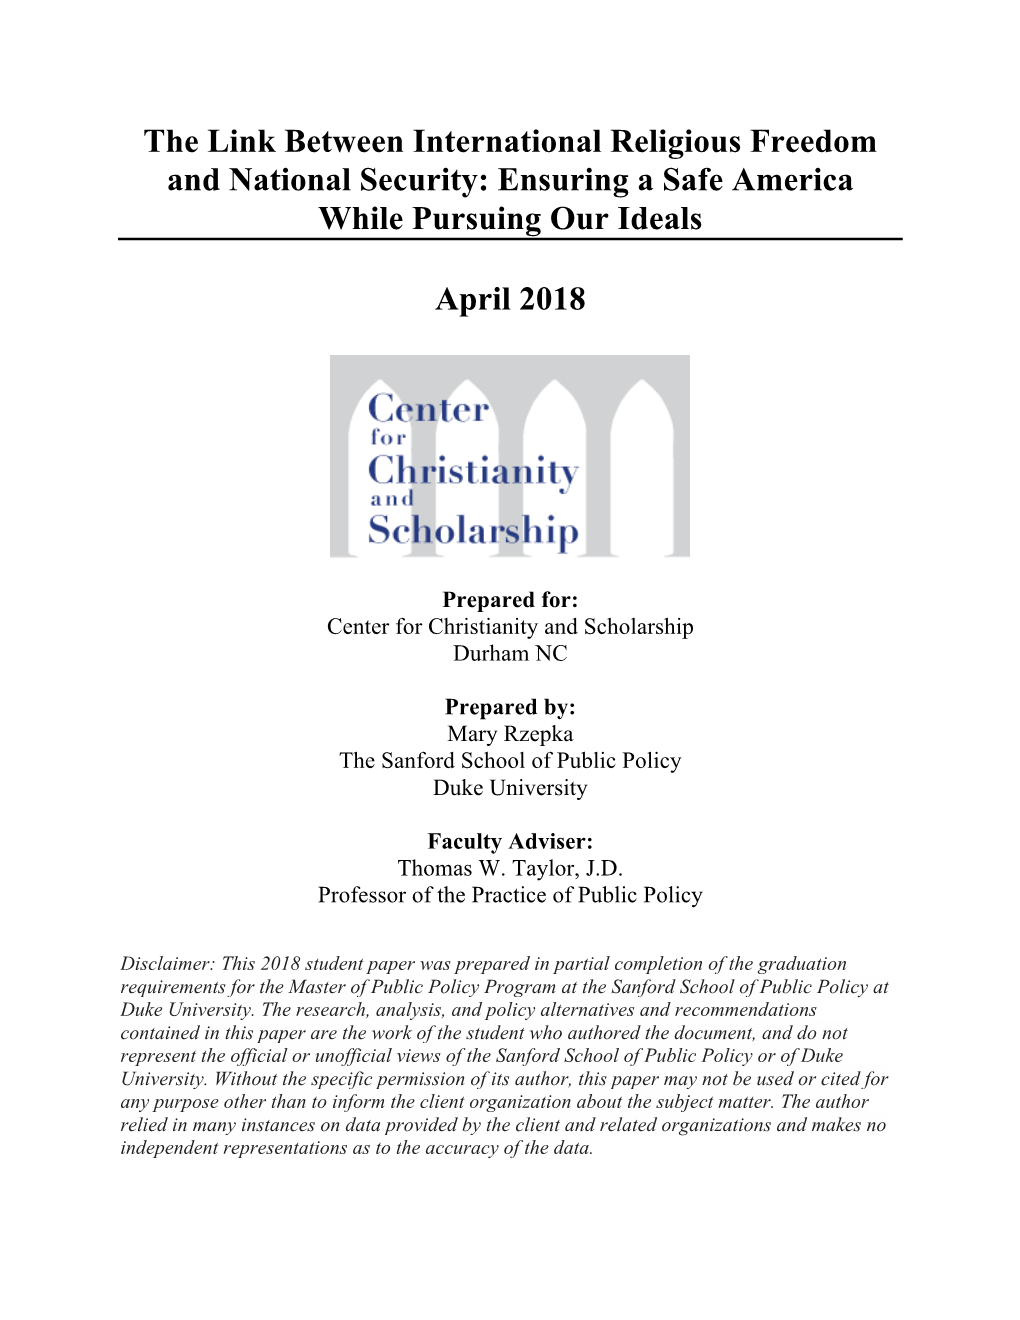 The Link Between International Religious Freedom and National Security: Ensuring a Safe America While Pursuing Our Ideals